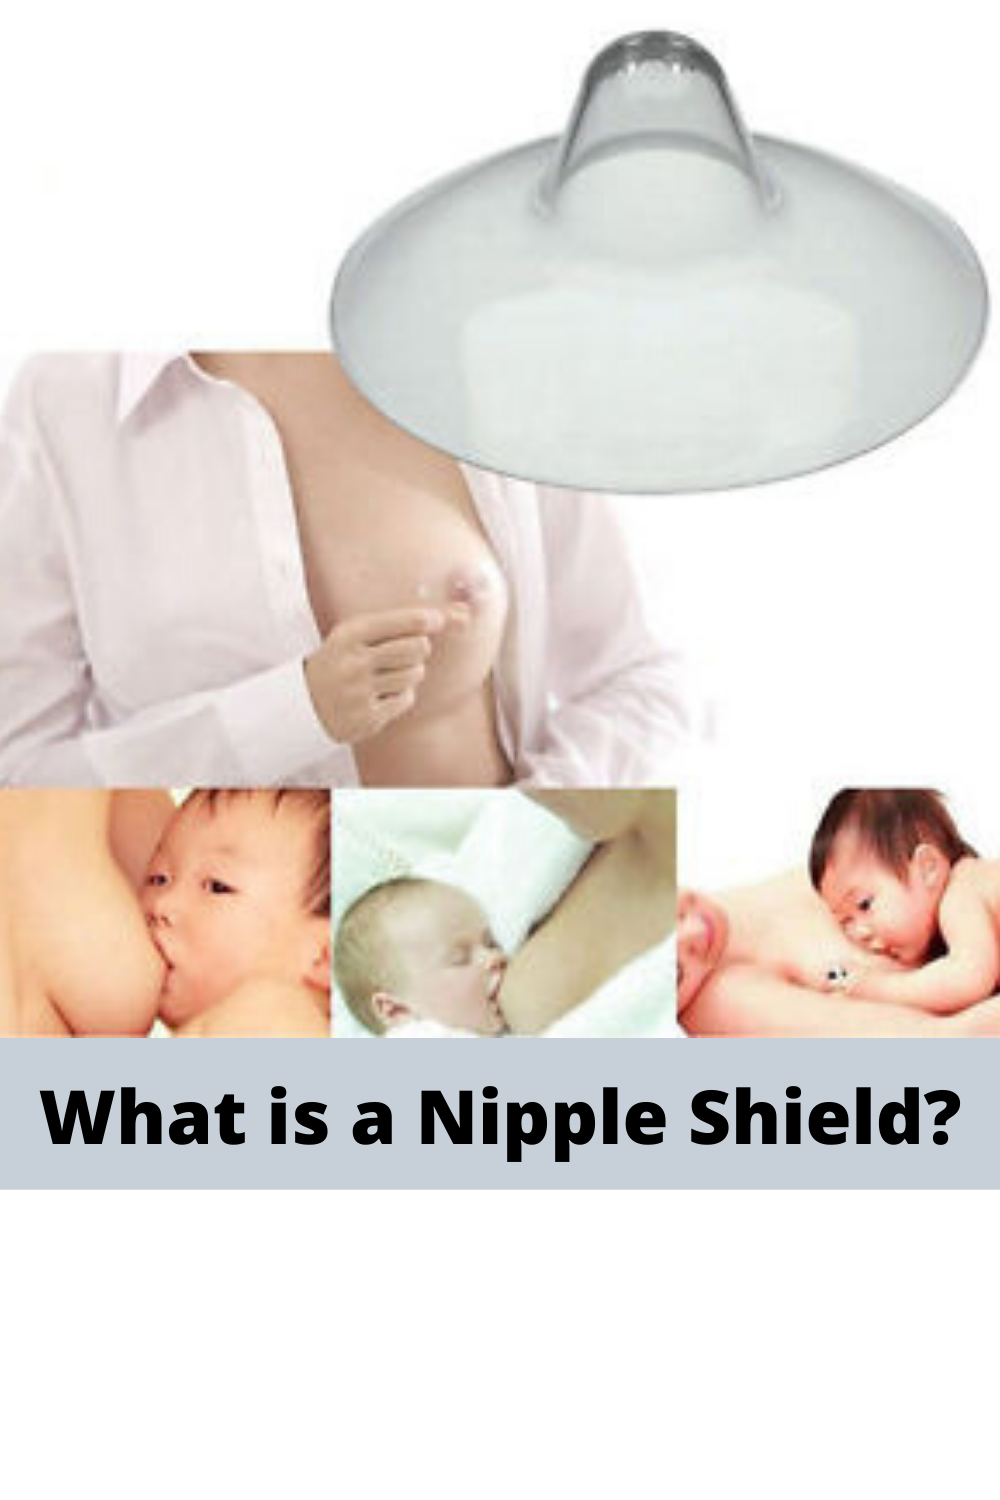 What is a nipple shield?